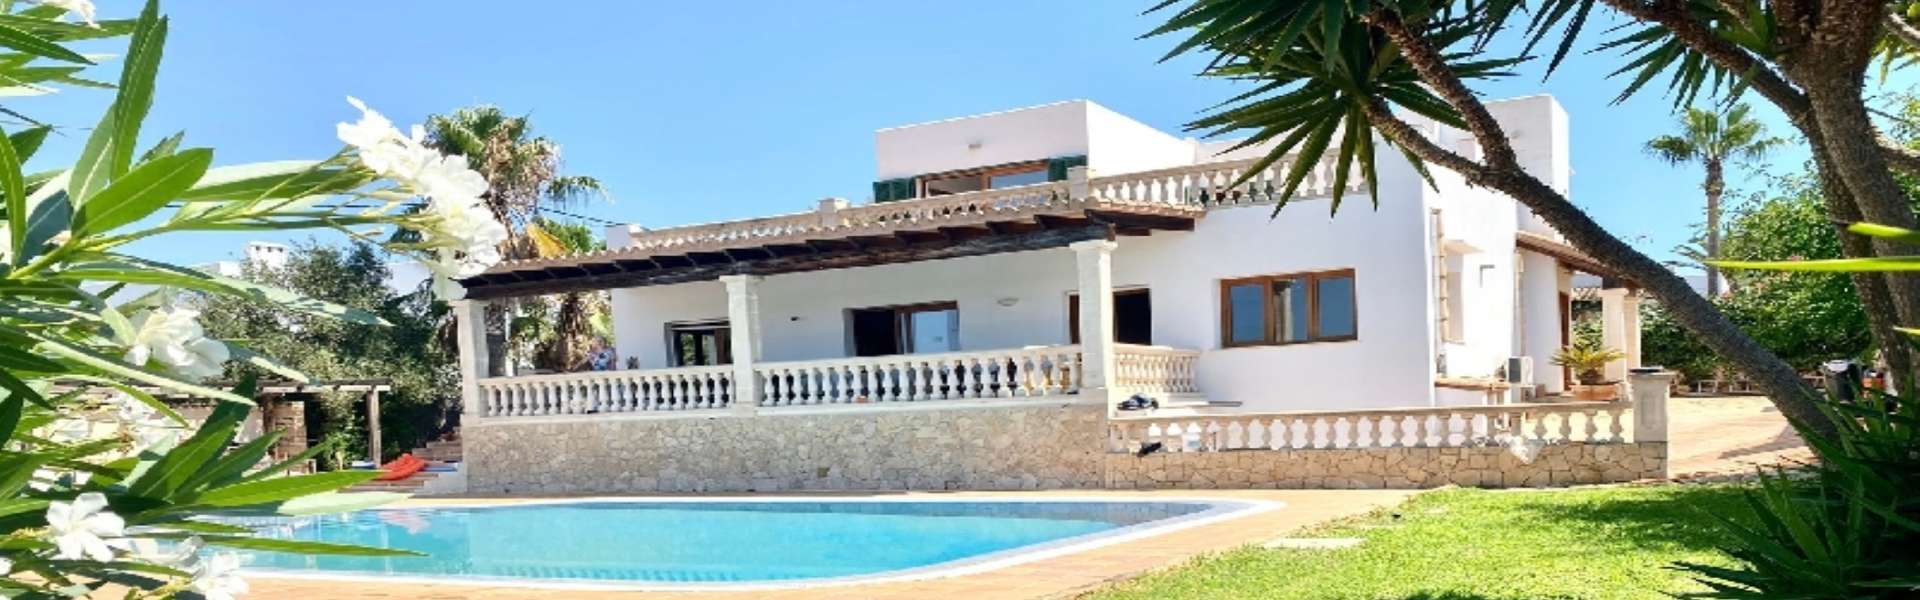 Detached villa for sale in Cala d'Or 